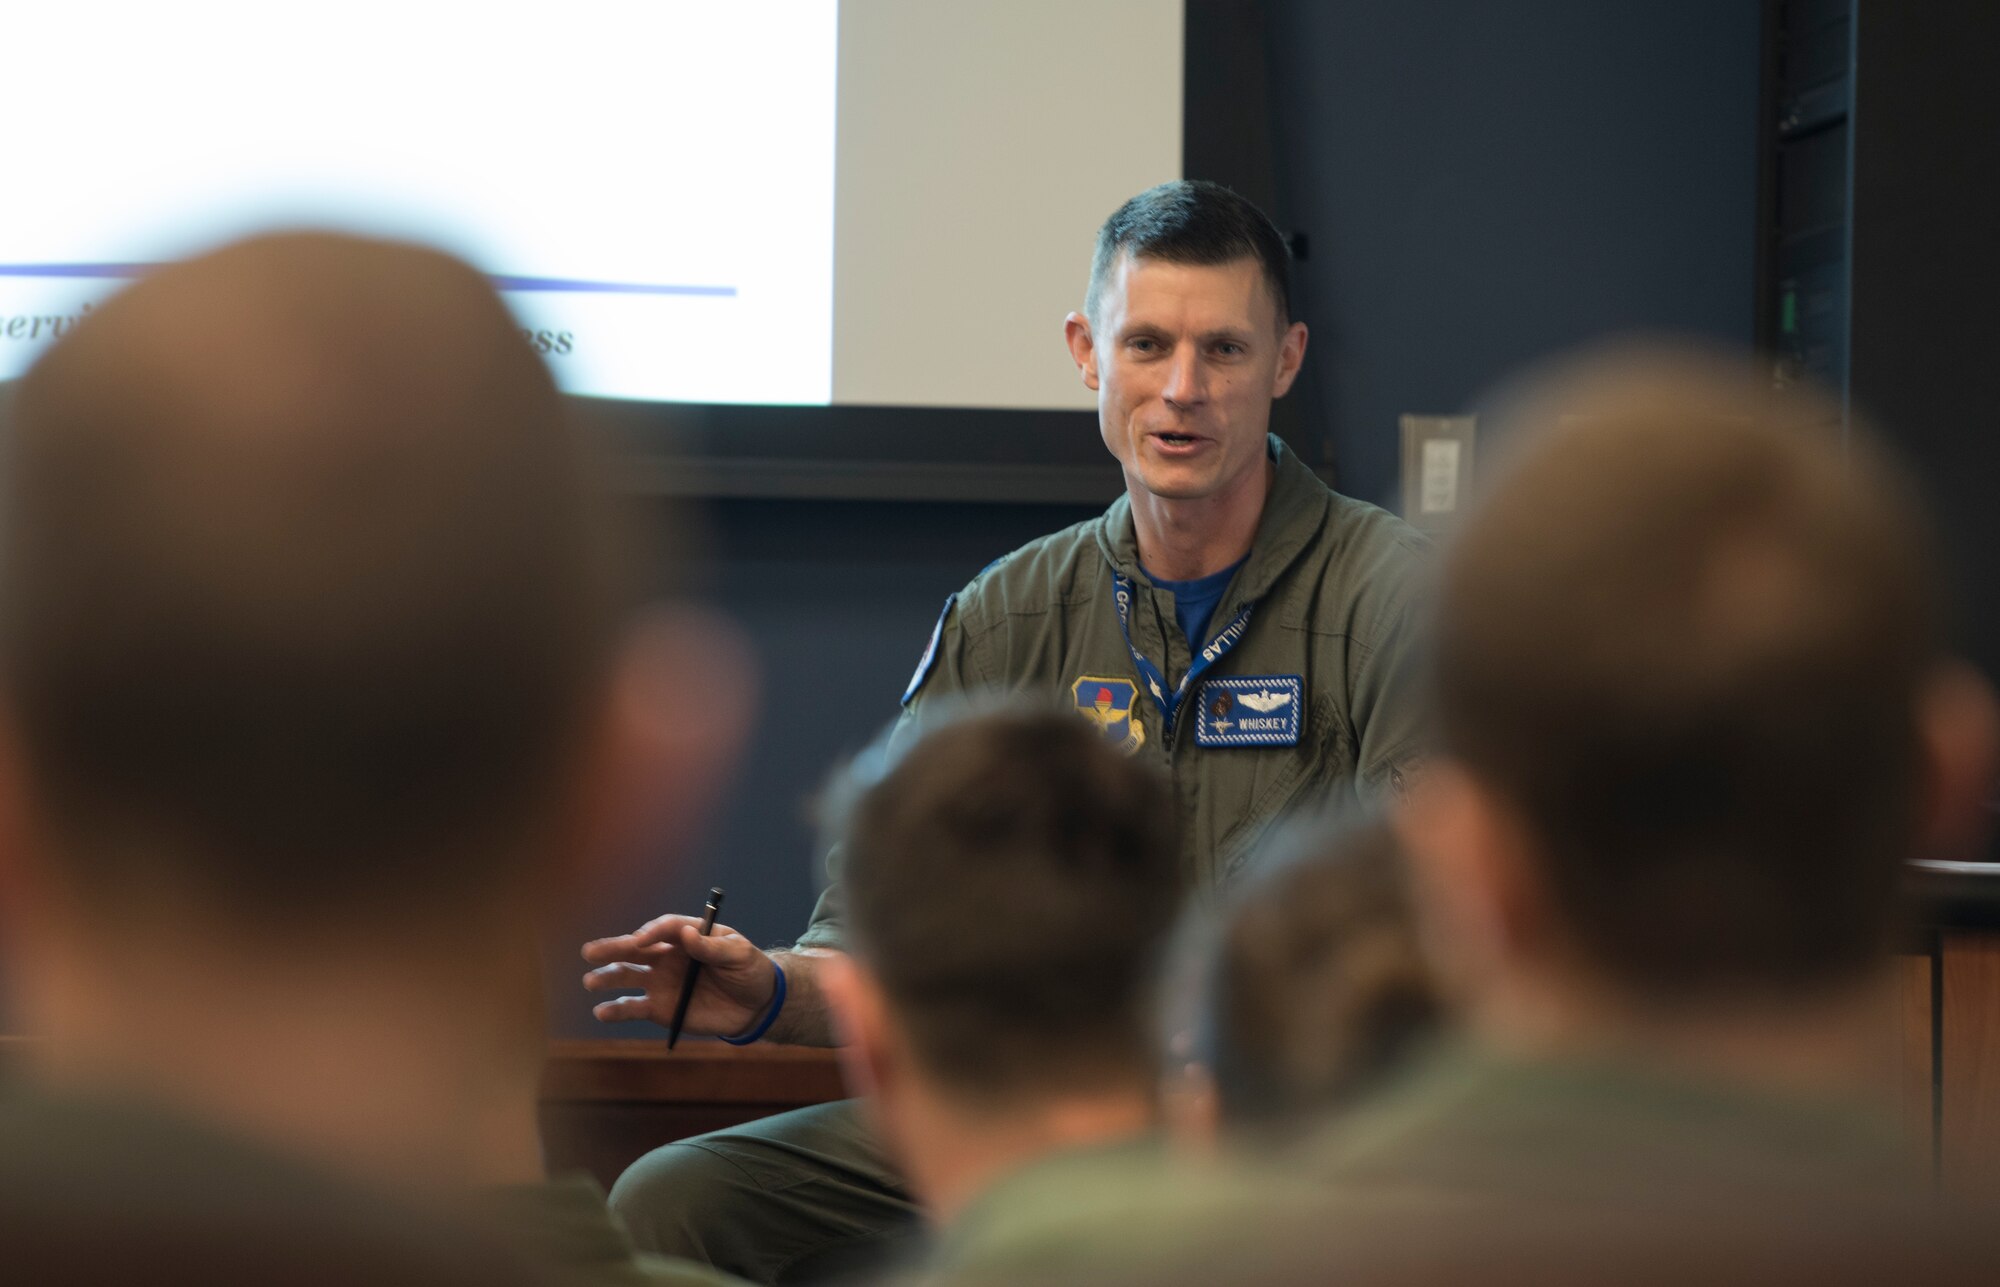 U.S. Air Force Lt. Col. Jon Snyder, 58th Fighter Squadron commander, speaks to members of the 58 FS during the Operational Safety Review May 18, 2019, at Eglin Air Force Base, Fla. Air Force Chief of Staff Gen. David Goldfein directed wing commanders to conduct the Operational Safety Review to identify trends, access planning processes and ensure decisions regarding acceptable risks are being made at the appropriate level. (U.S. Air Force photo by Staff Sgt. Peter Thompson)